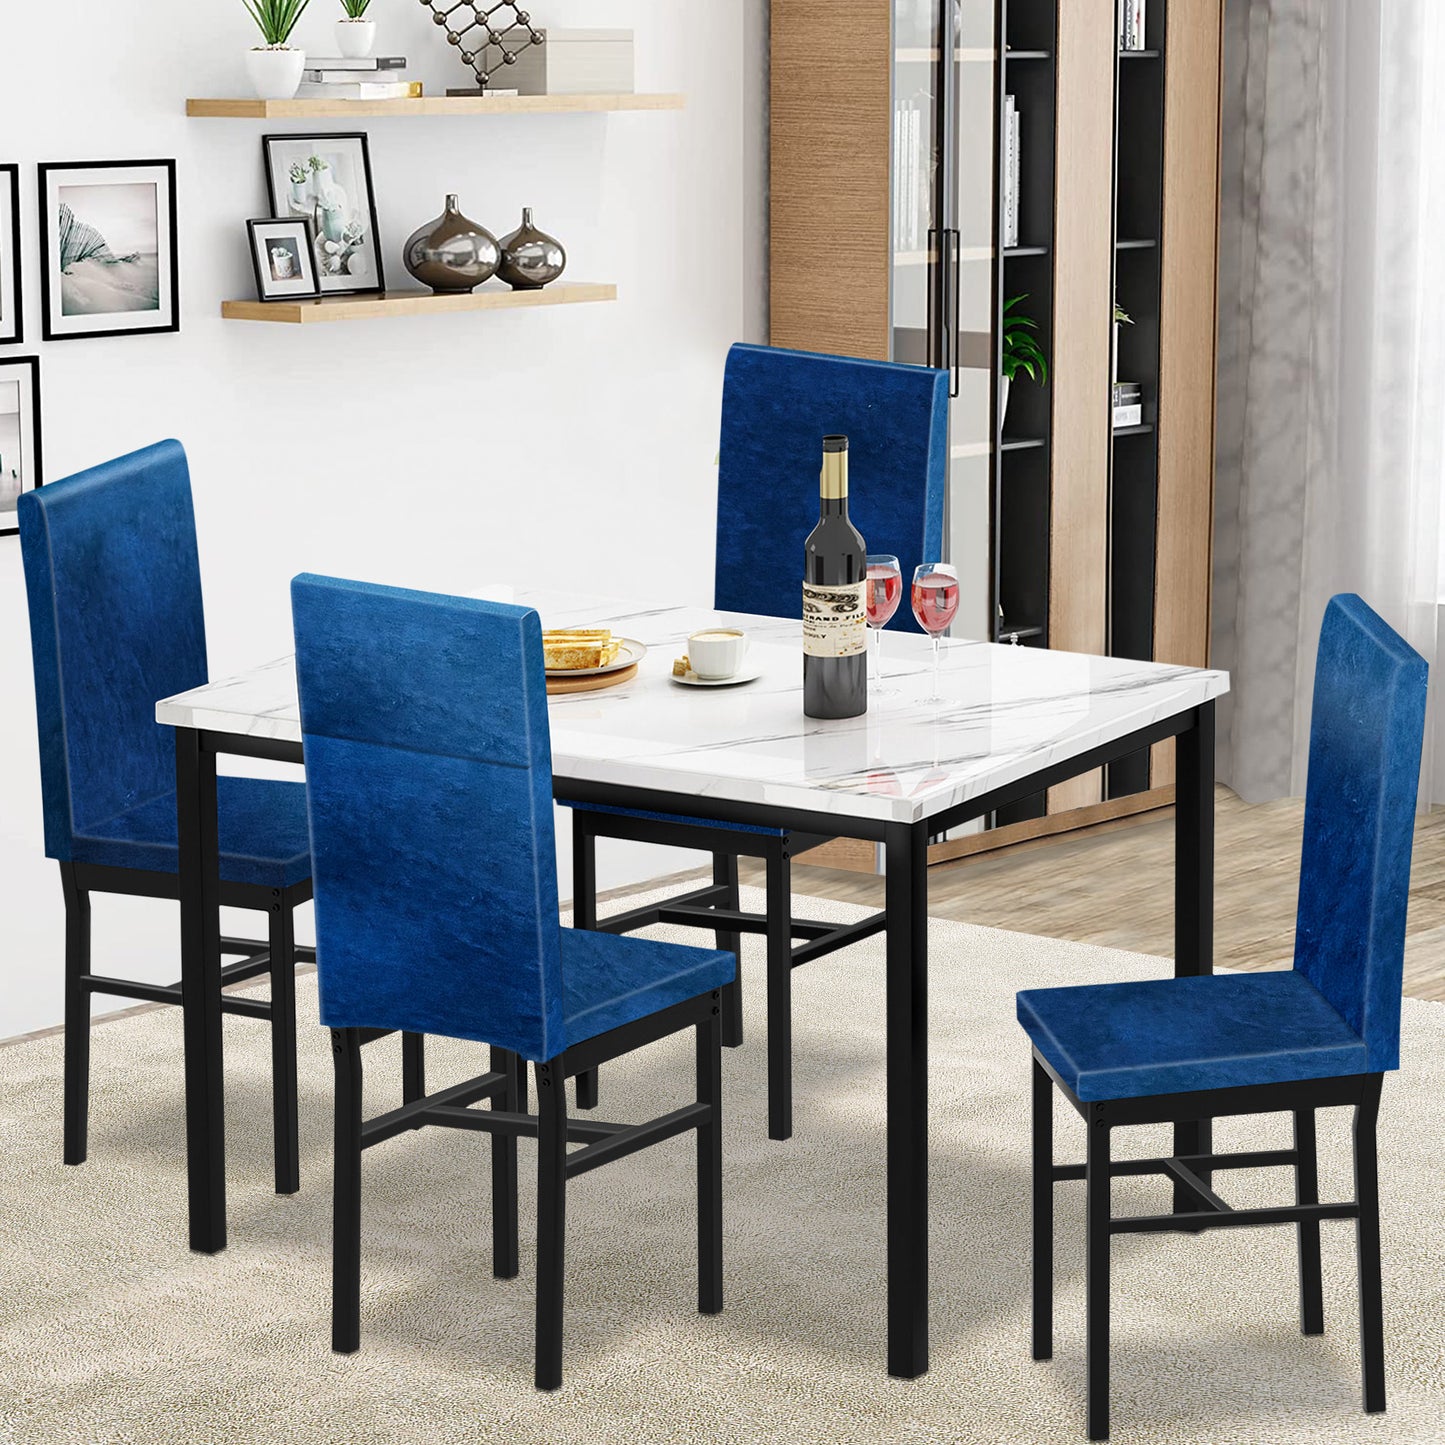 5 Piece Dining Table Set, Kitchen Dining Table and Chairs Set for 4, Modern Marble Table and 4 PU Leather Upholstered Chairs, Home Dining Set for Small Space, Breakfast Nook, White, D8529